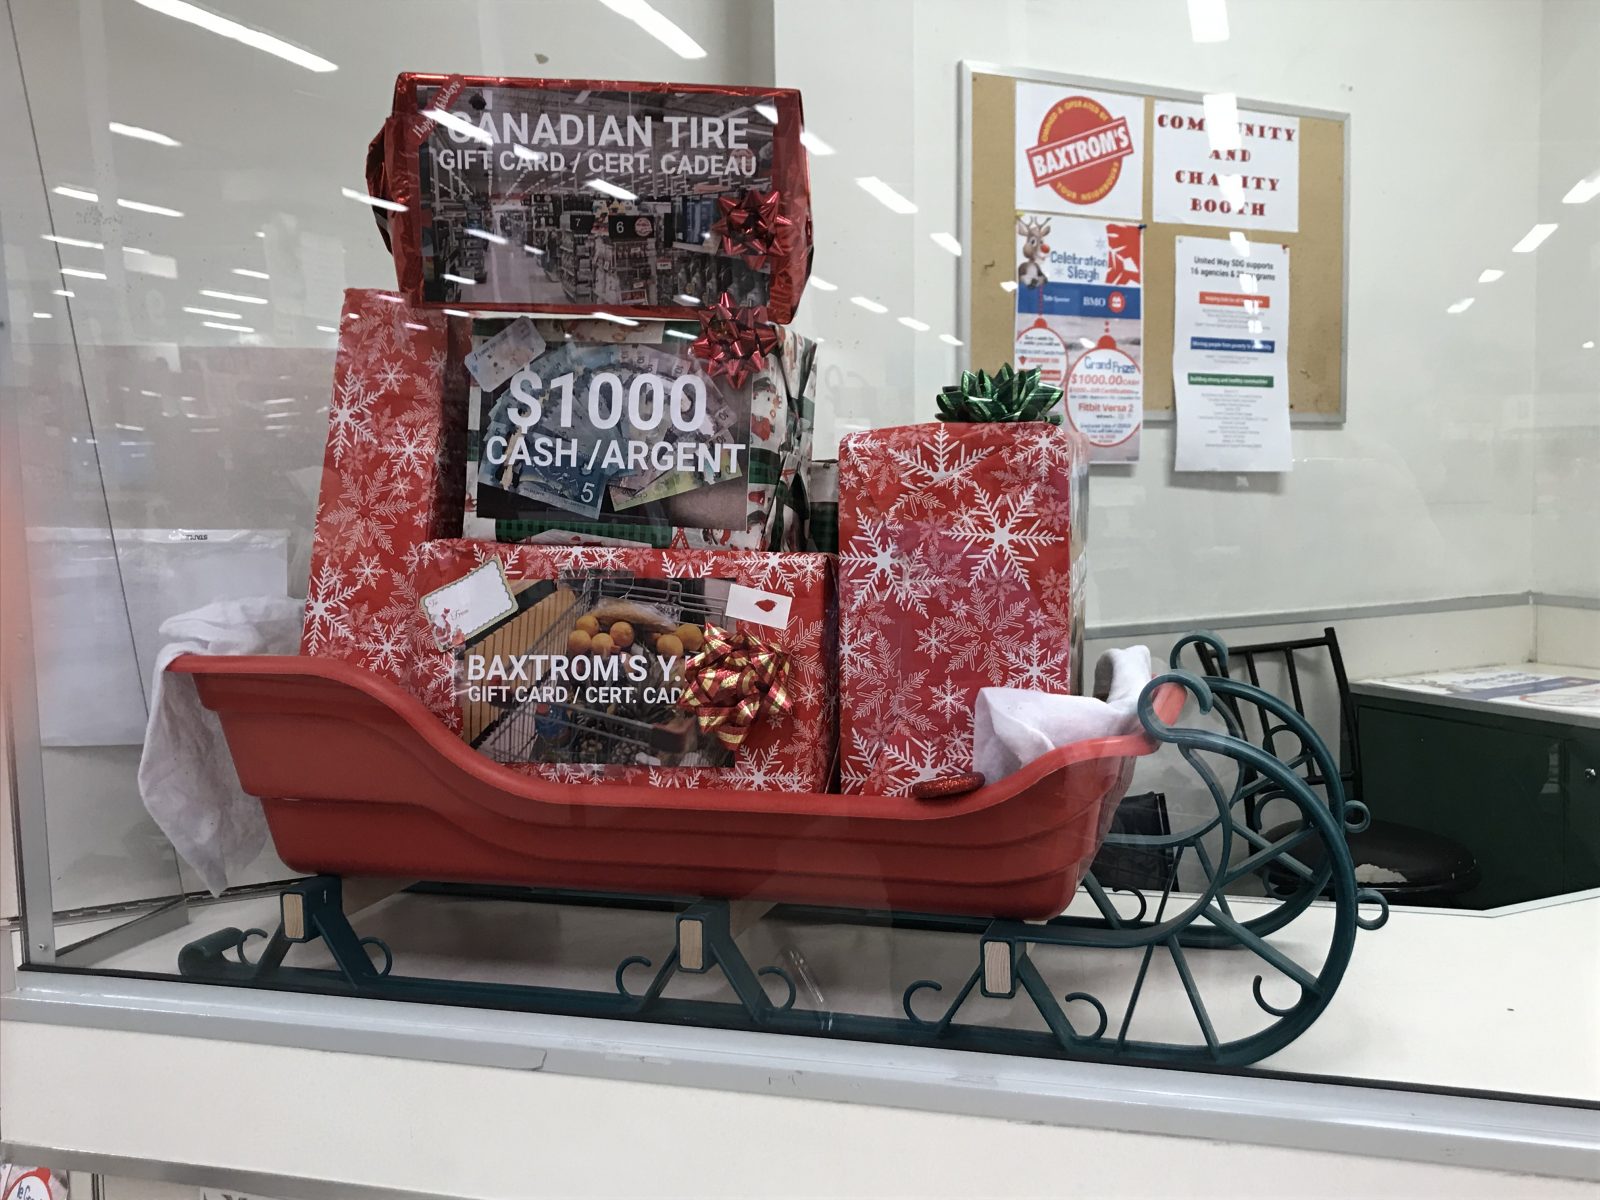 United Way Celebration Sleigh contest ends this Friday